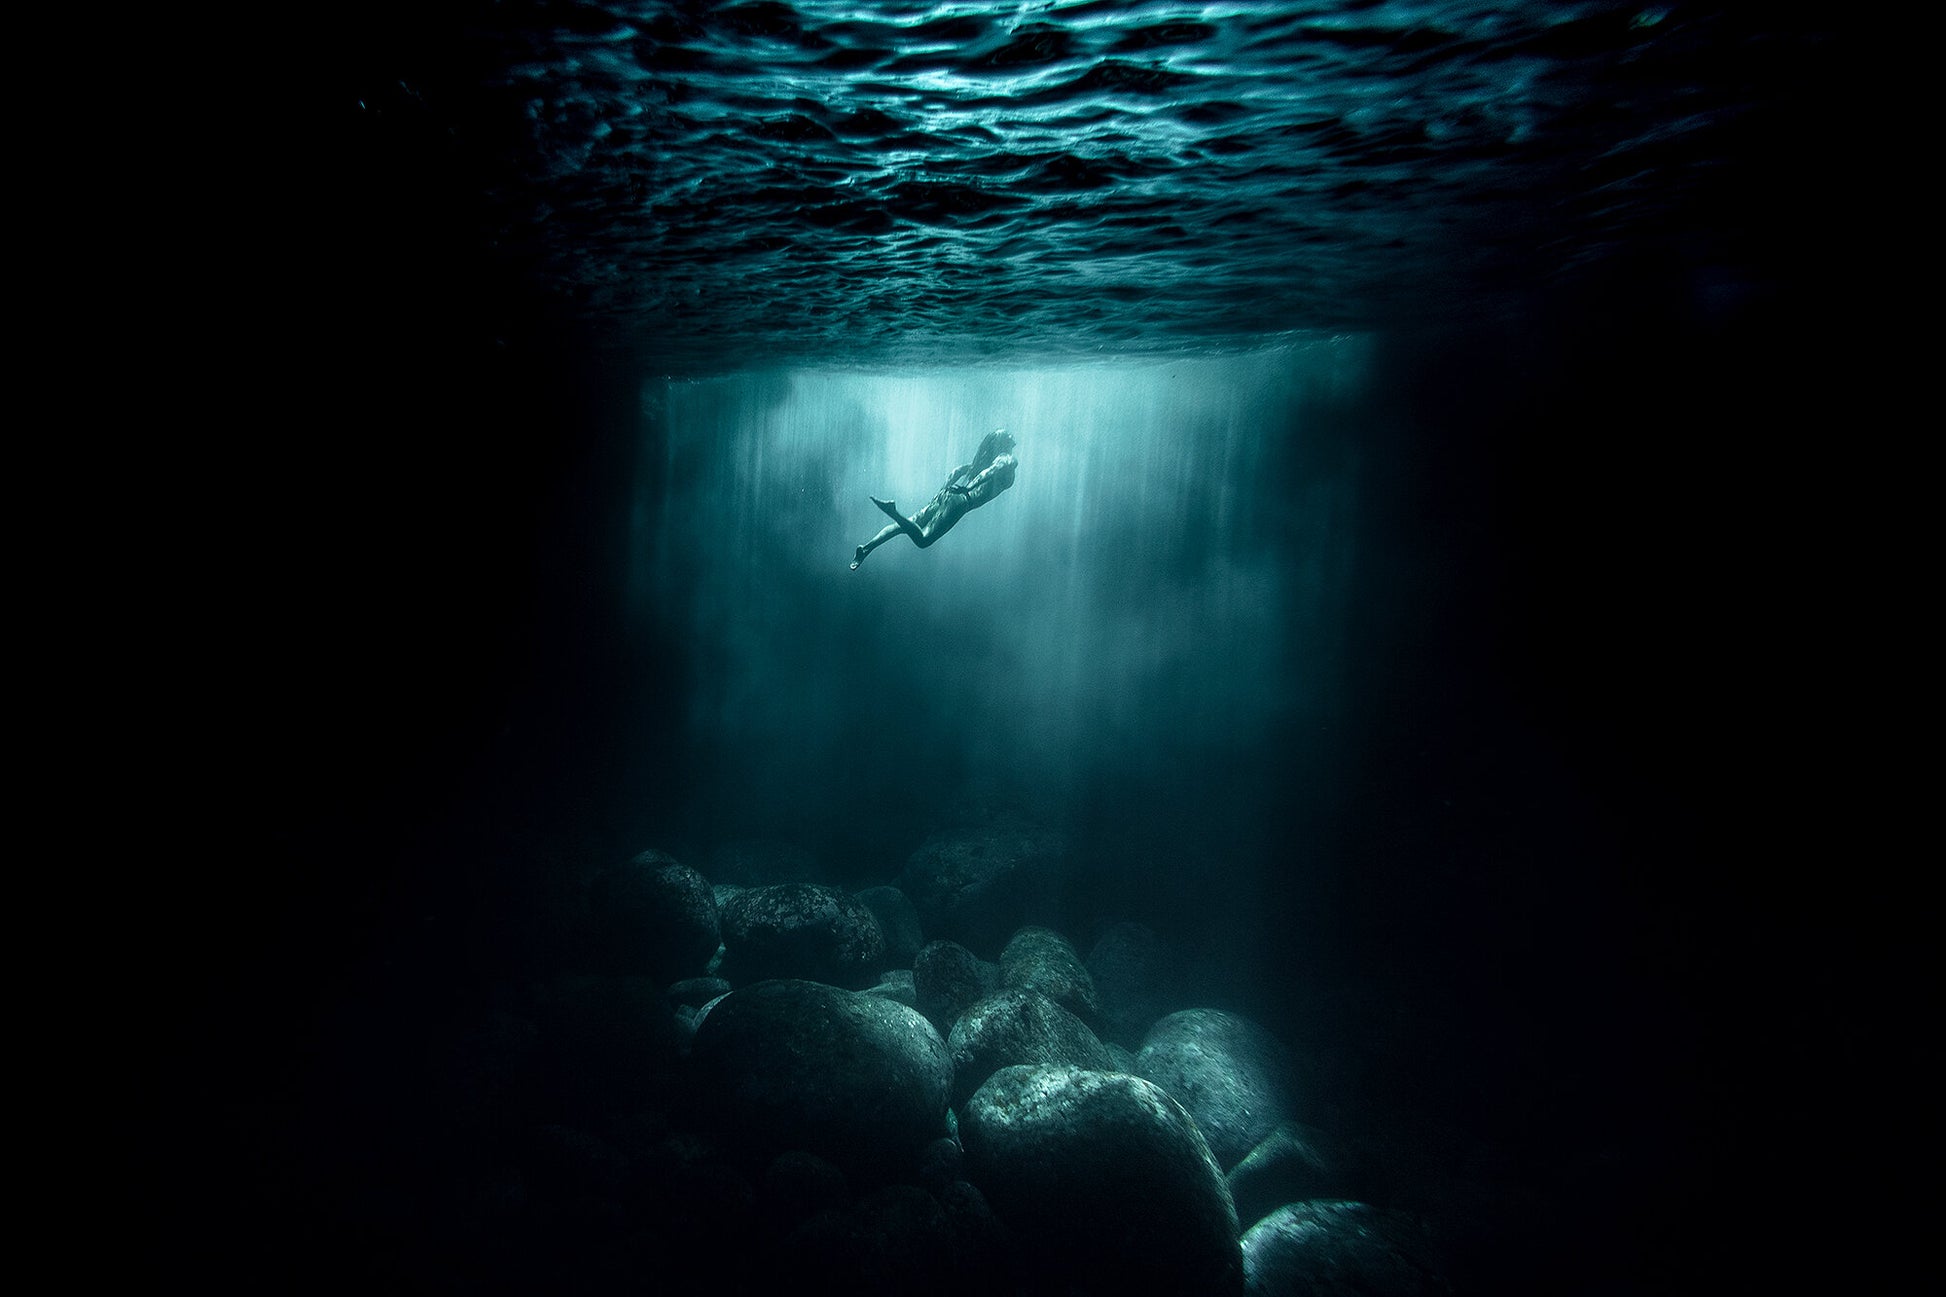 Underwater Paradise- a photograph by Mark McInnis.